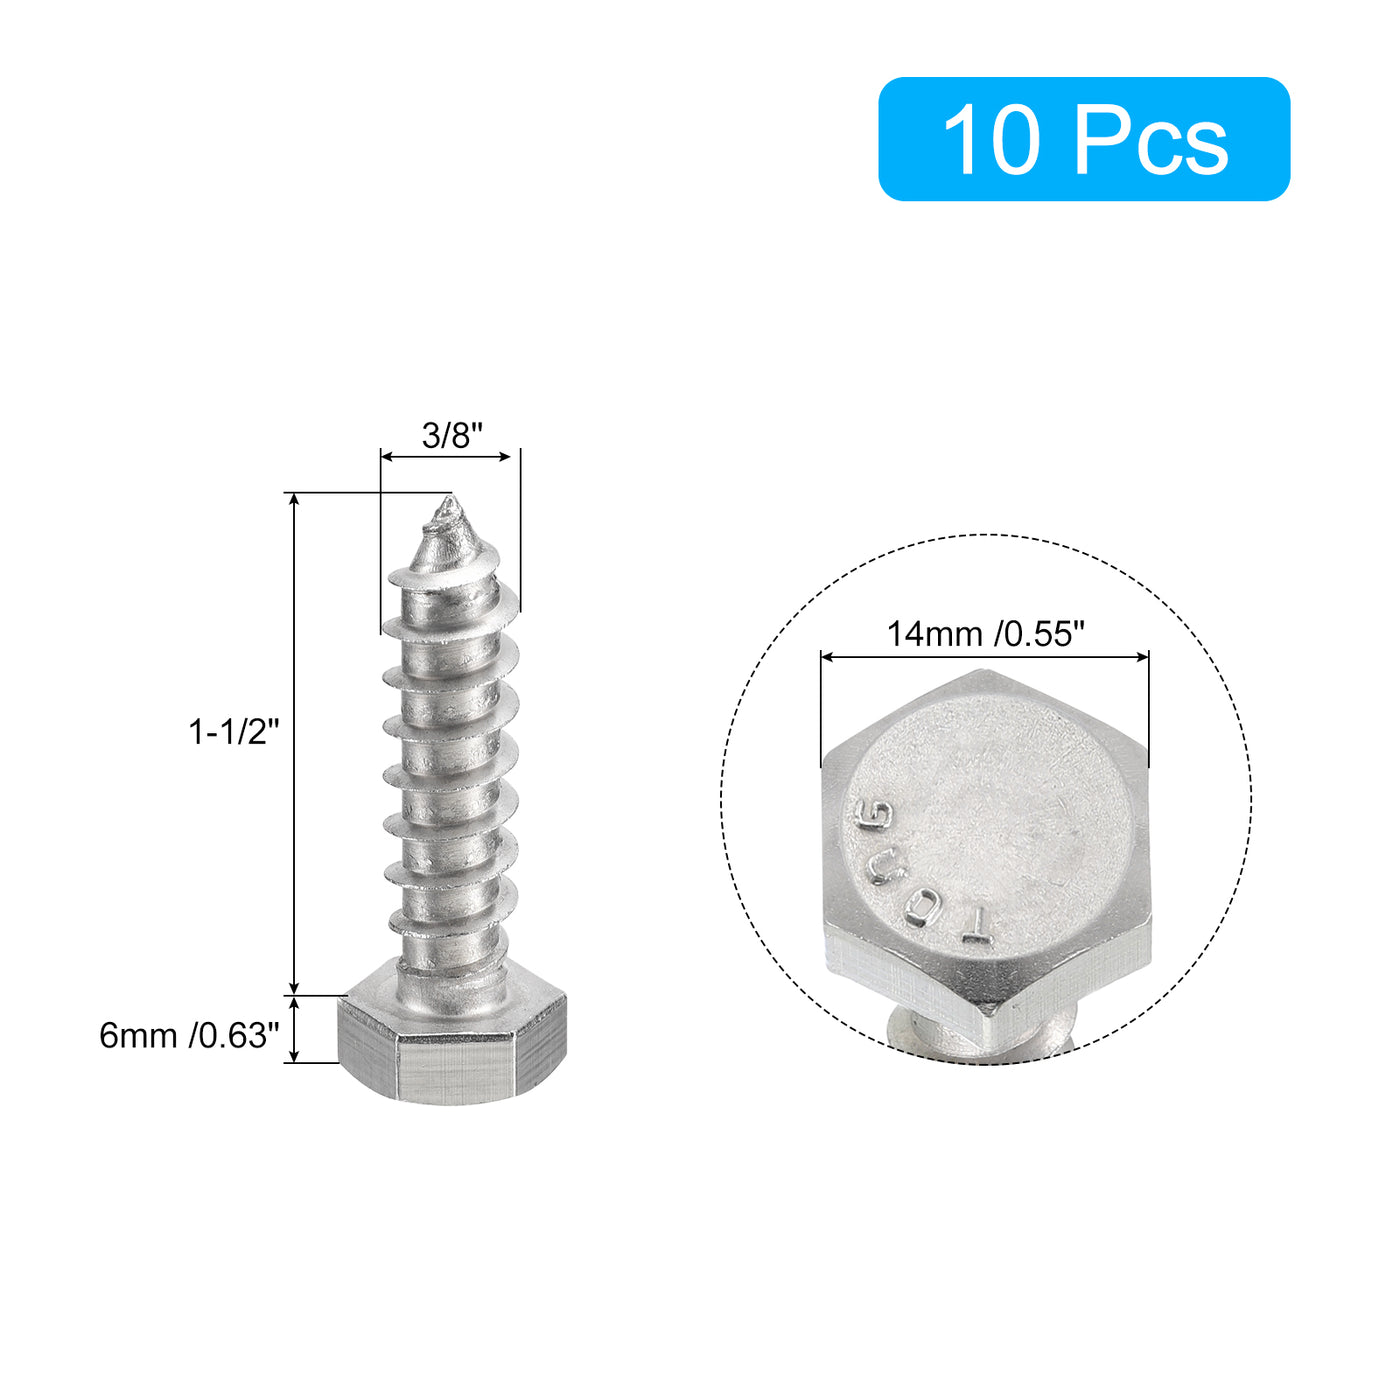 uxcell Uxcell Hex Head Lag Screws Bolts, 10pcs 3/8" x 1-1/2" 304 Stainless Steel Wood Screws